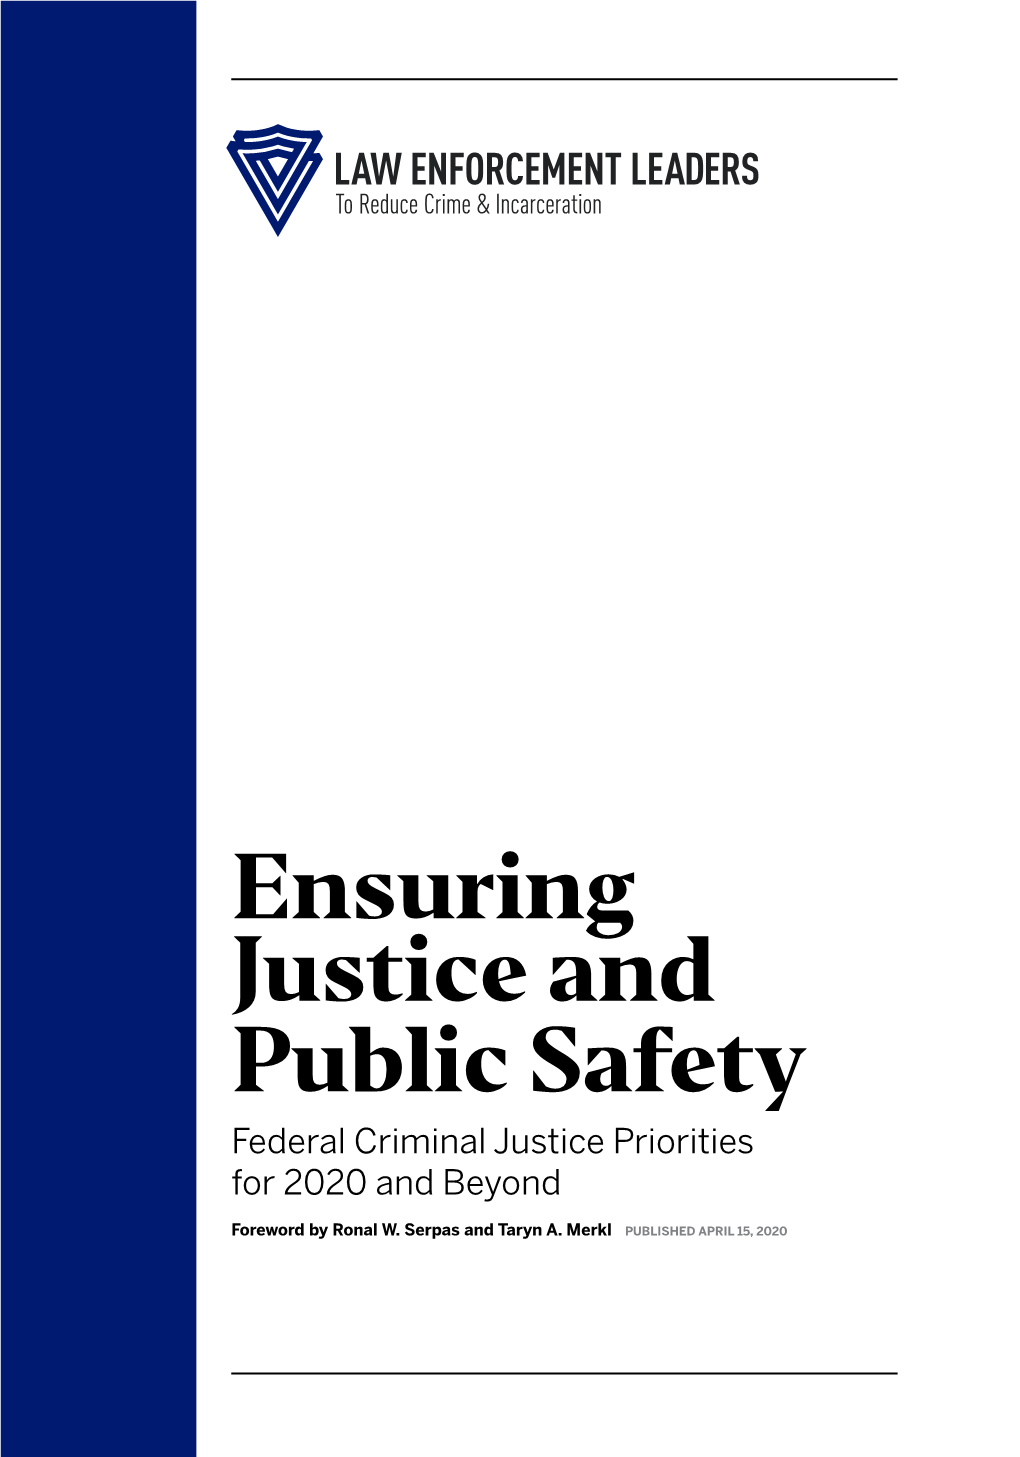 Ensuring Justice and Public Safety Federal Criminal Justice Priorities for 2020 and Beyond